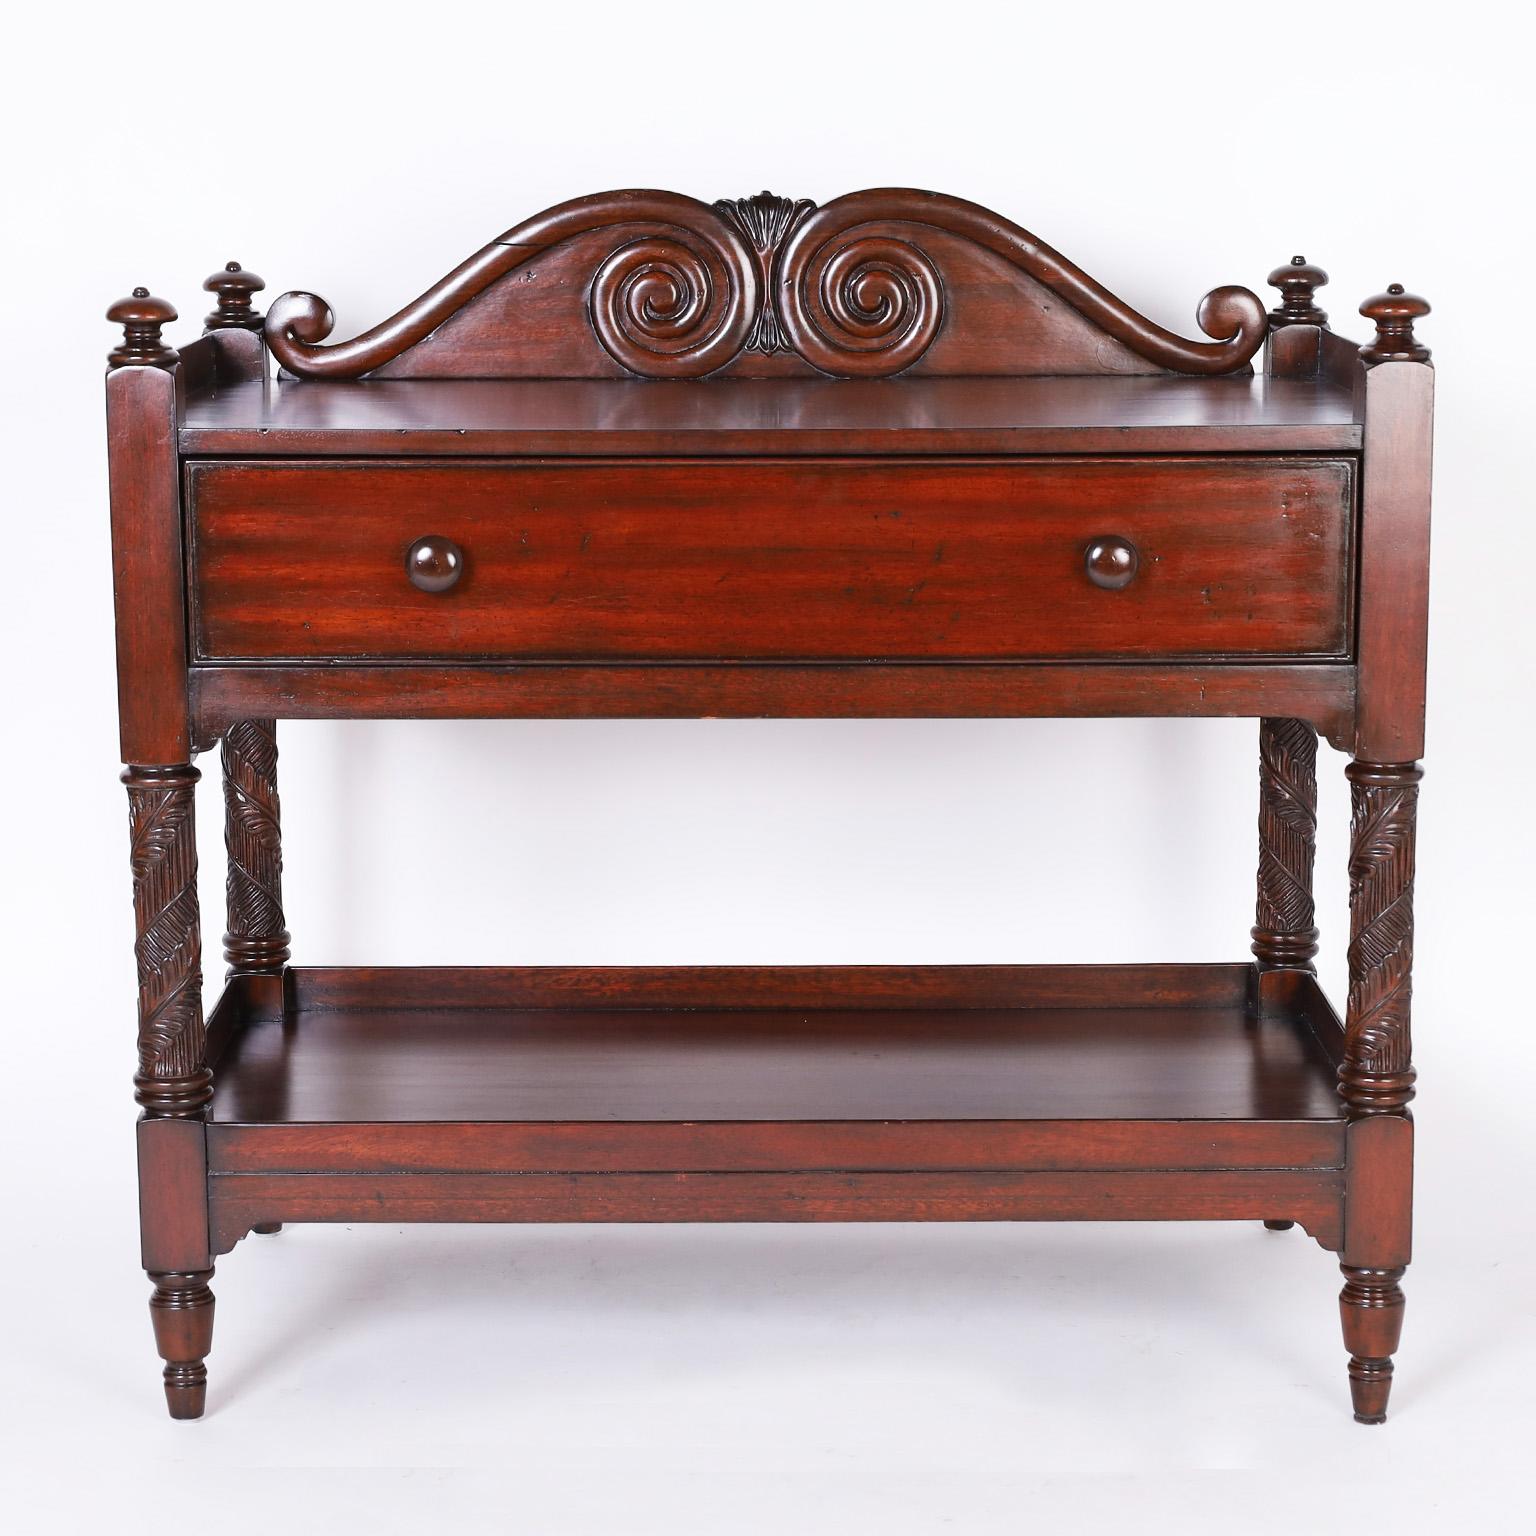 British colonial style two tiered server or stand crafted in mahogany with a West Indies style, a carved gallery over one drawer, having carved and beaded supports and turned feet. Signed Ralph Lauren in the drawer.